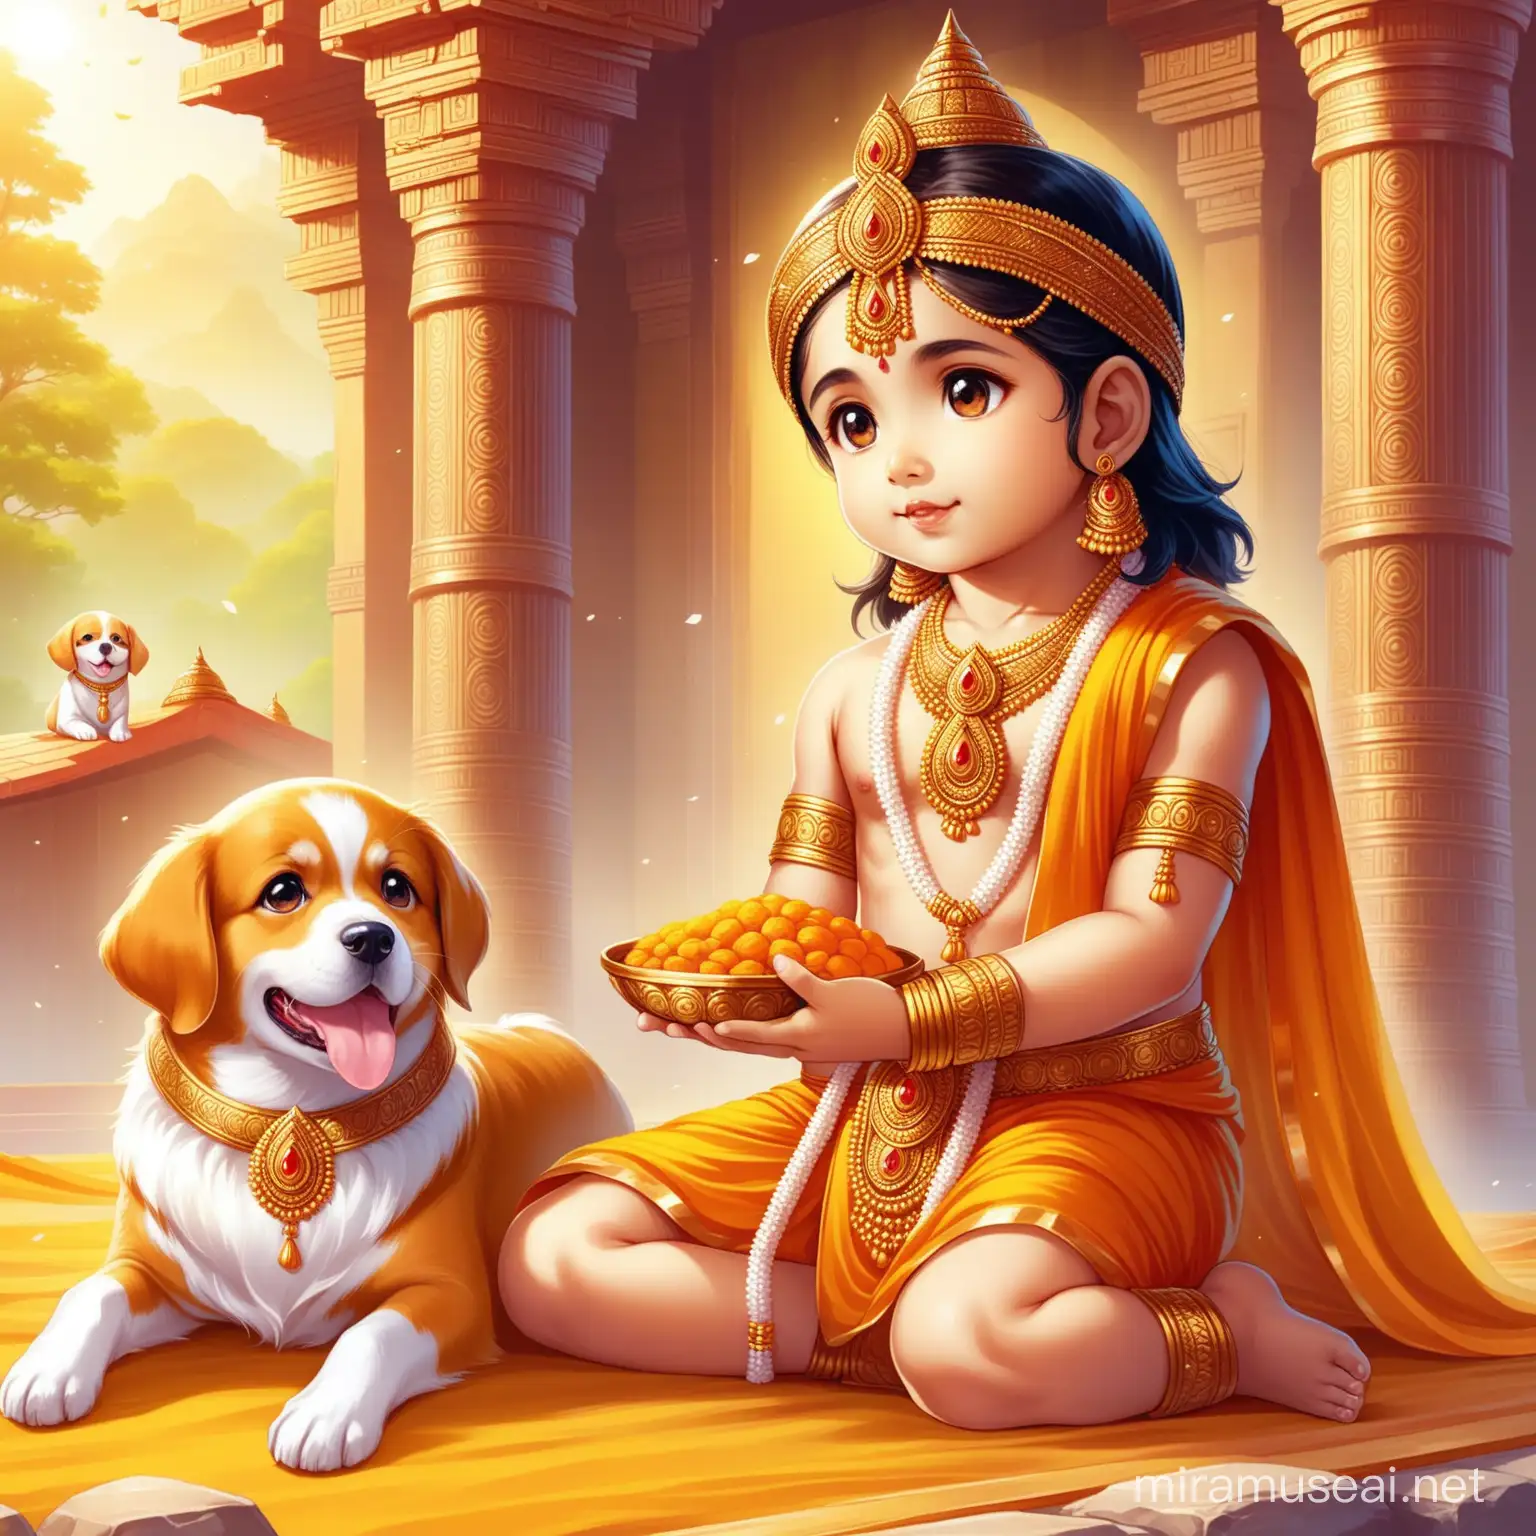  Child image of Lord shree ram with  a cute dog